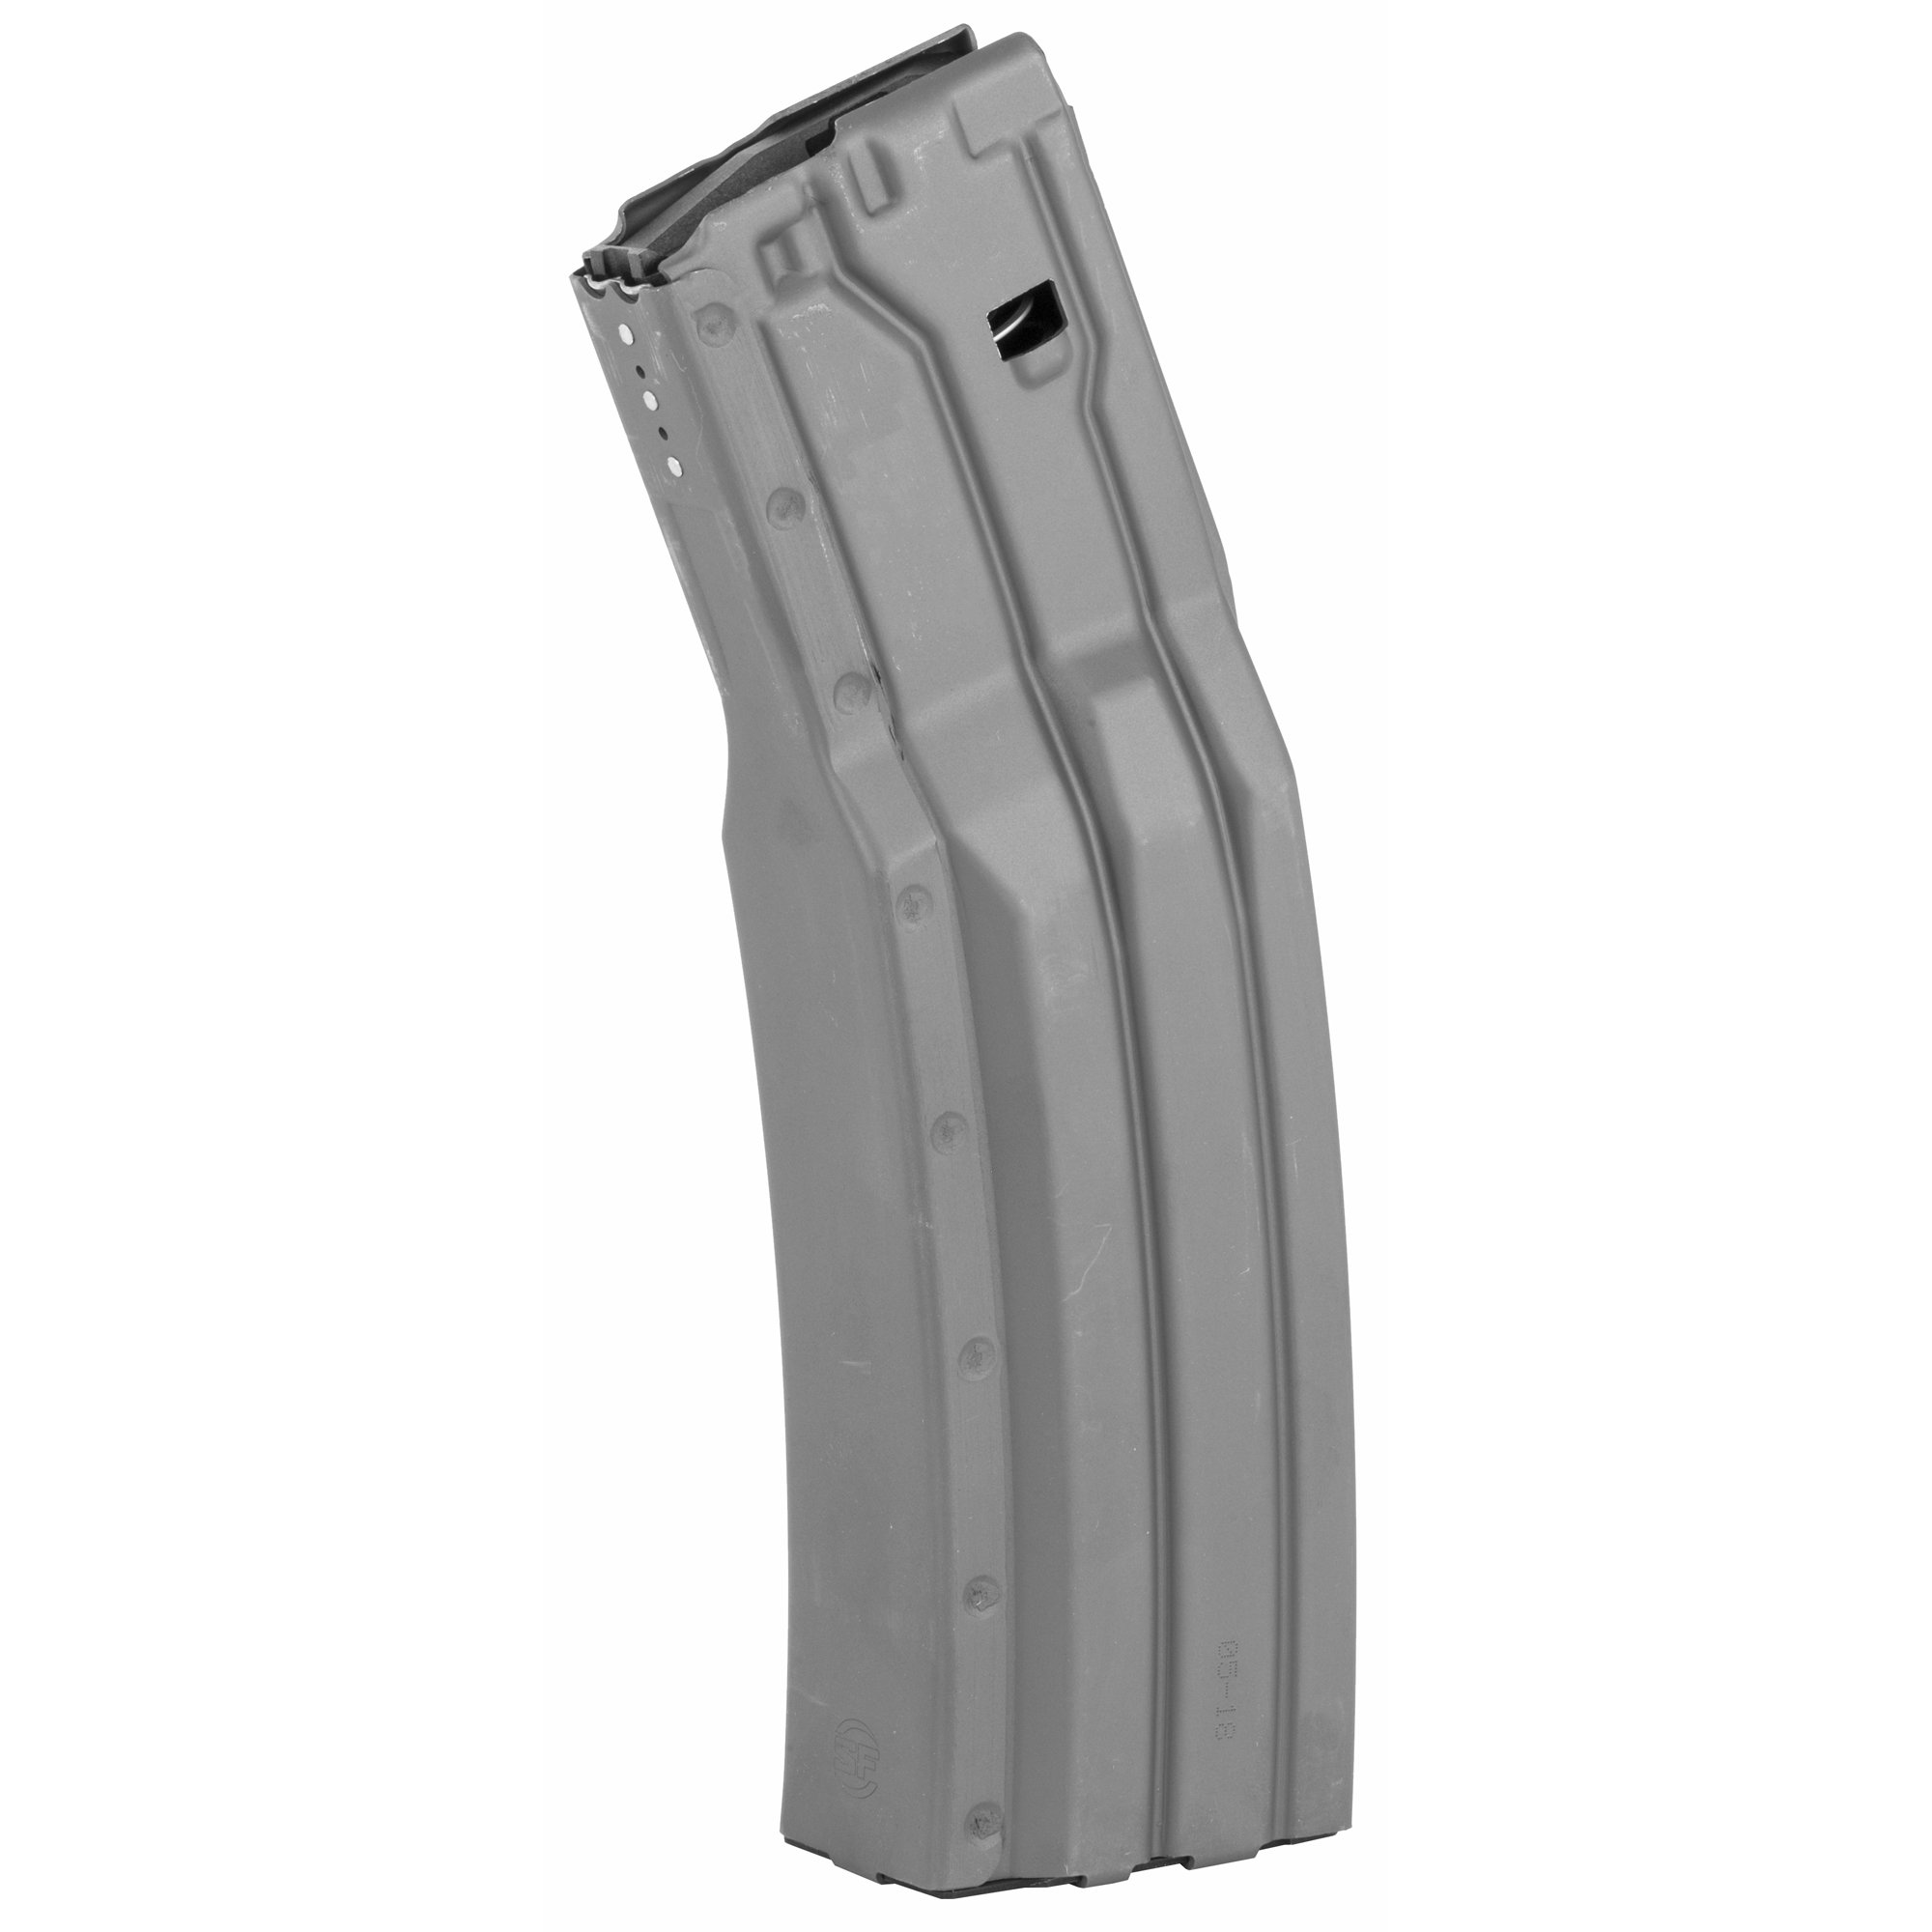 SureFire High-Capacity Magazines are compatible with M4/M16/AR-15 variants ...